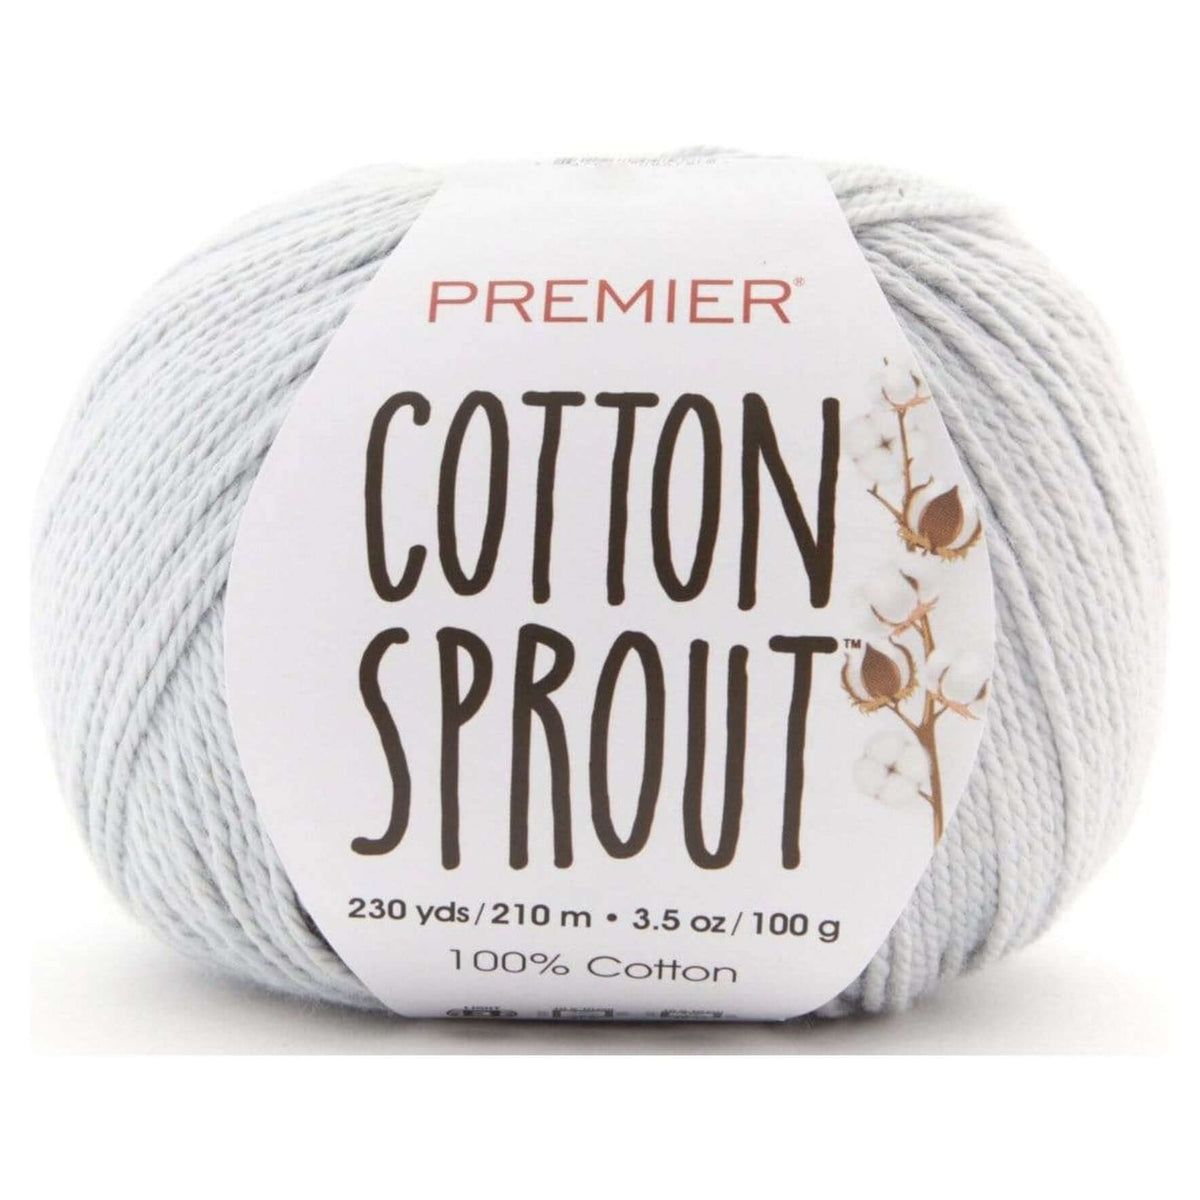 Premier Yarns Cotton Sprout DK, Natural Cotton Yarn, Machine-Washable, DK  Yarn for Crocheting and Knitting, Gloaming, 3.5 oz, 230 Yards